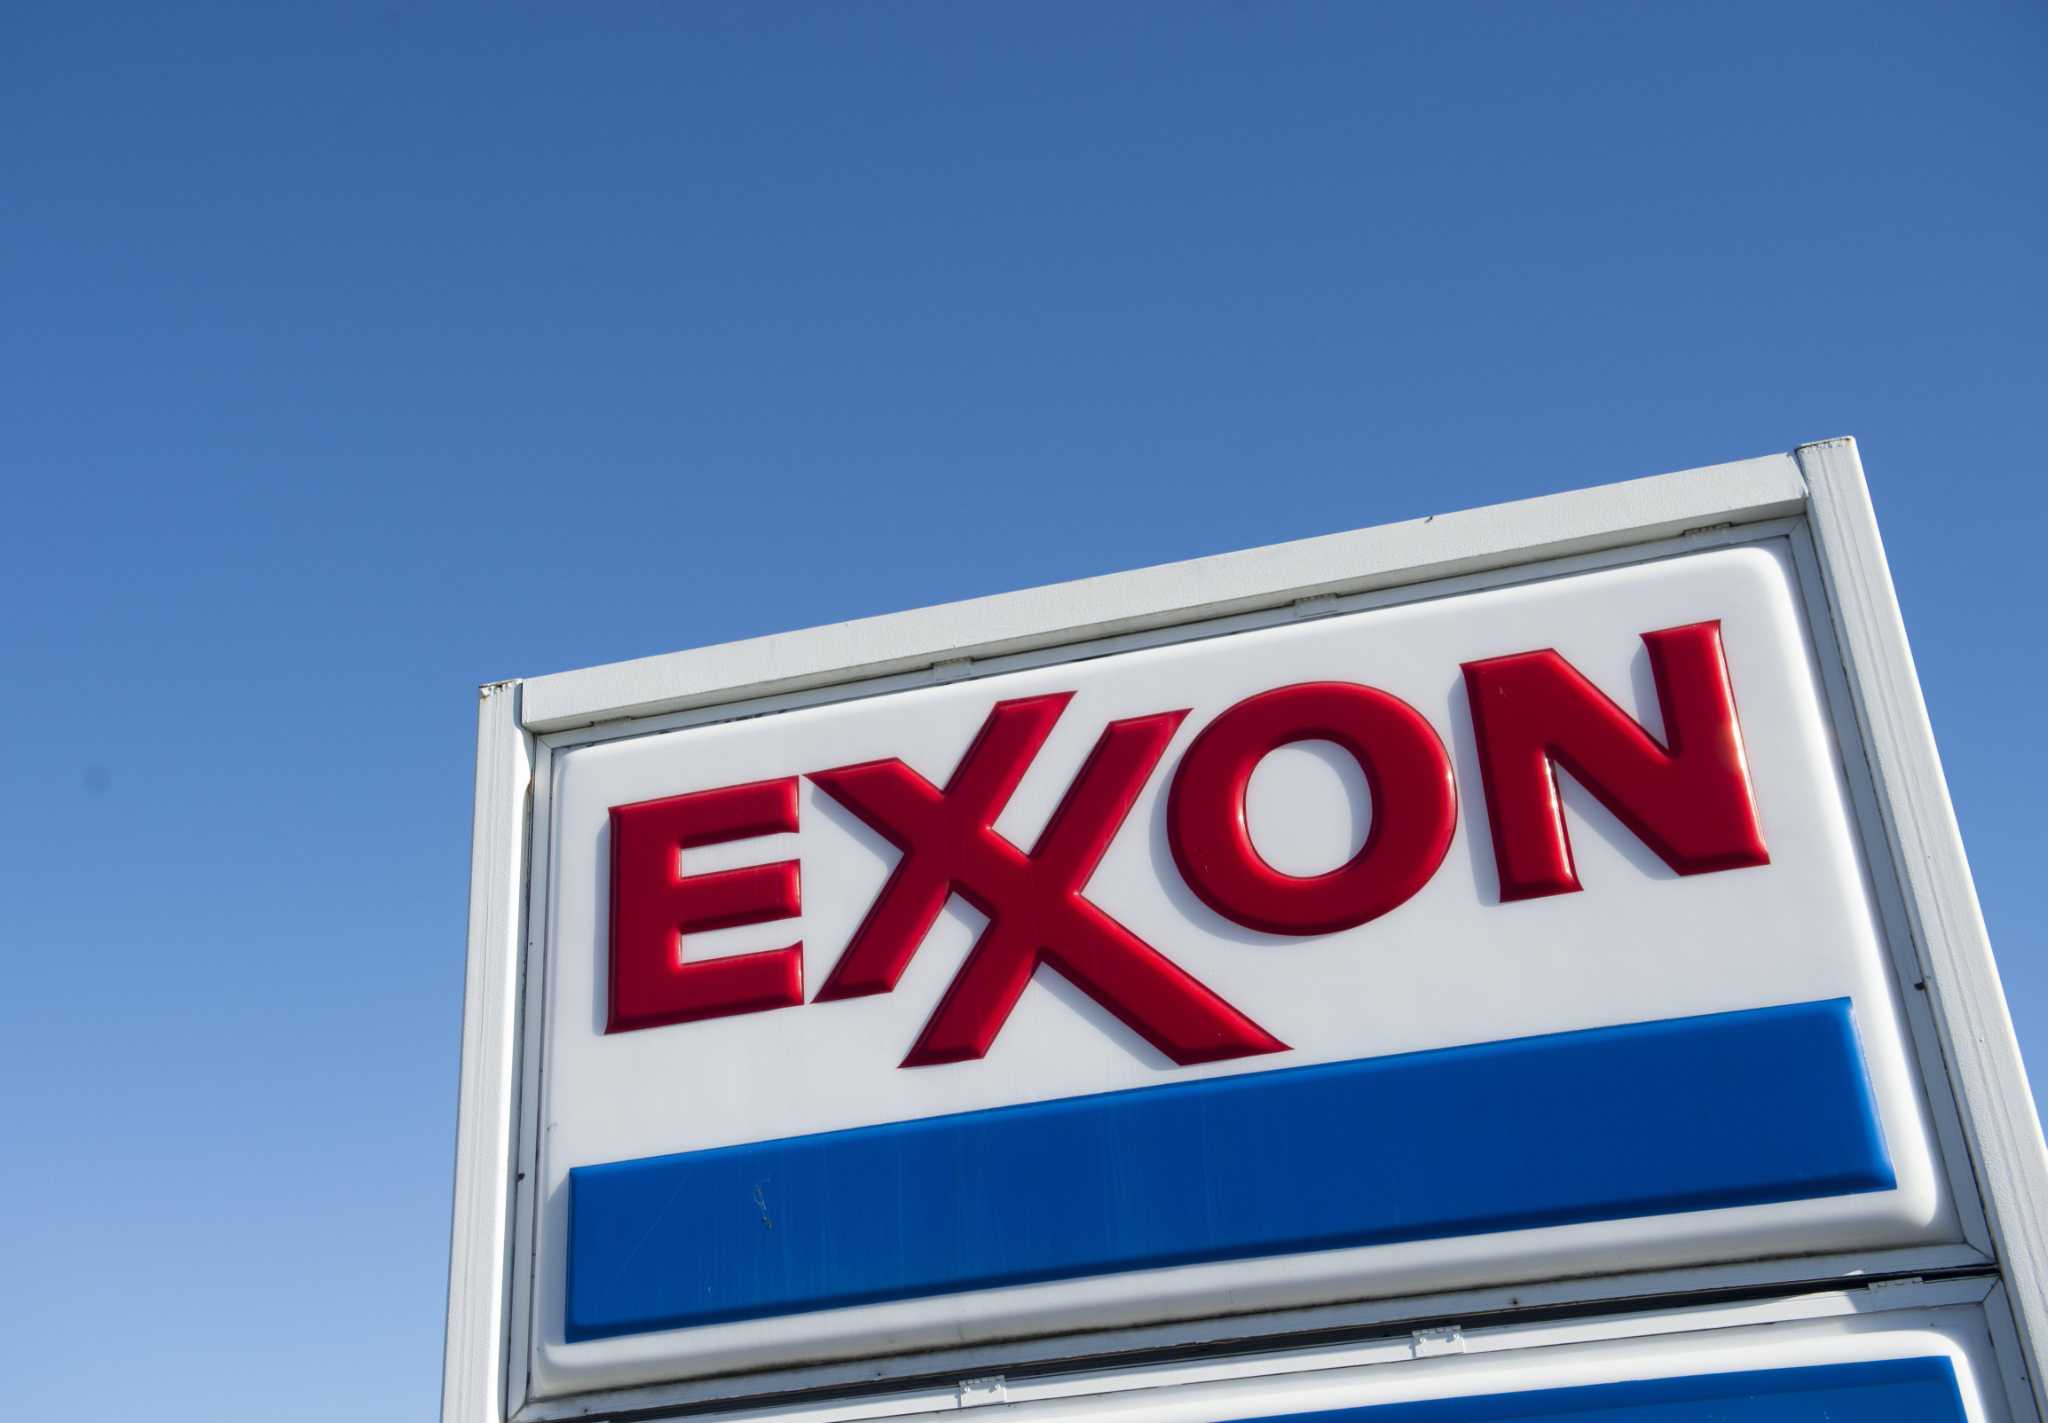 (FILES) In this file photo taken on January 5, 2016 An Exxon gas station is seen in Woodbridge, Virginia. - Exxon Mobil reported a second-quarter loss July 31, 2020, joining other petroleum giants in suffering the hit from lower oil prices due to crashing demand amid the coronavirus pandemic. (Photo by Saul LOEB / AFP) (Photo by SAUL LOEB/AFP via Getty Images)